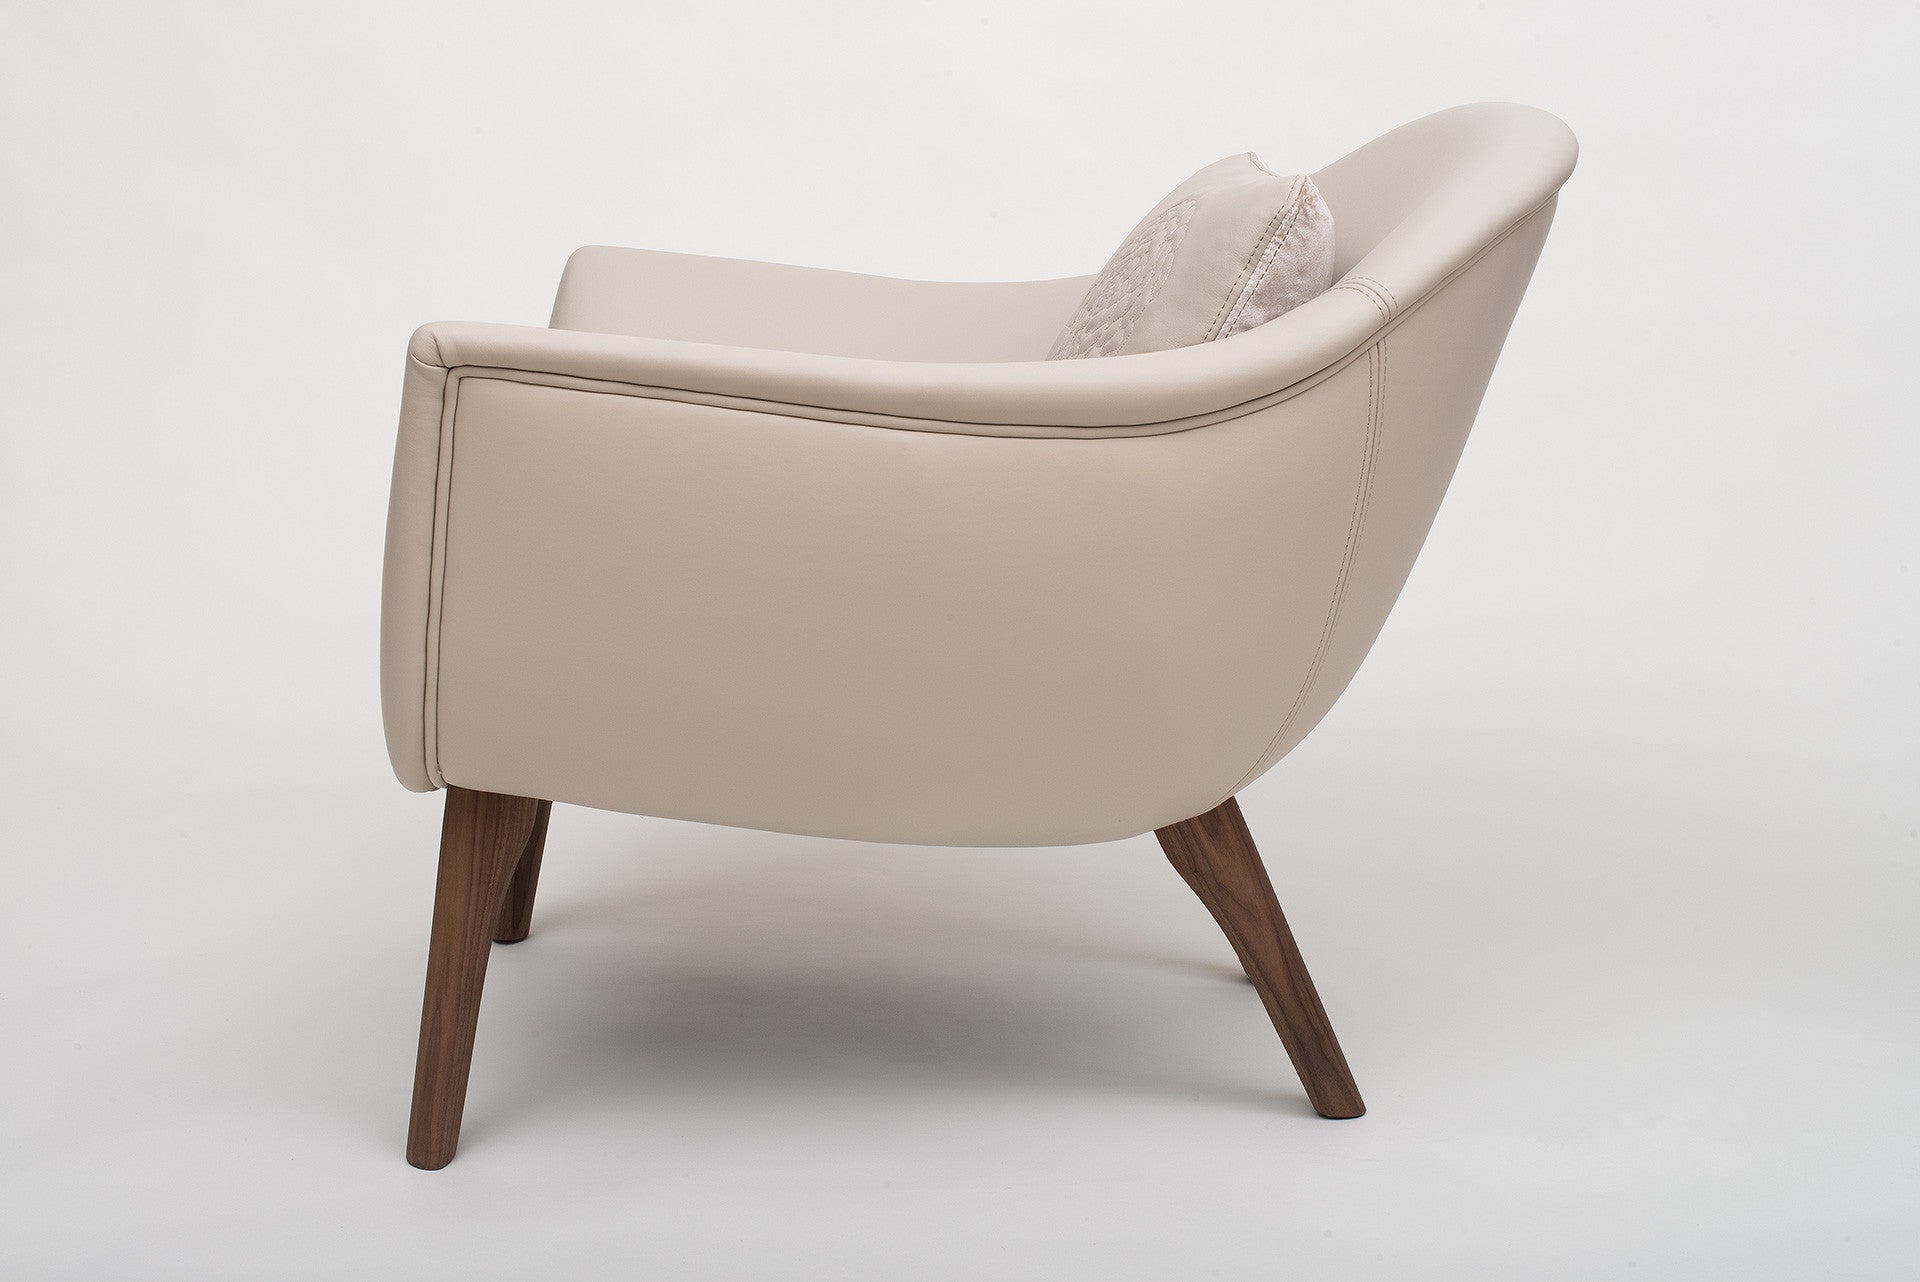 Bella Rest Chair - Furniture - Midsummer. Made in italy leather chair. 